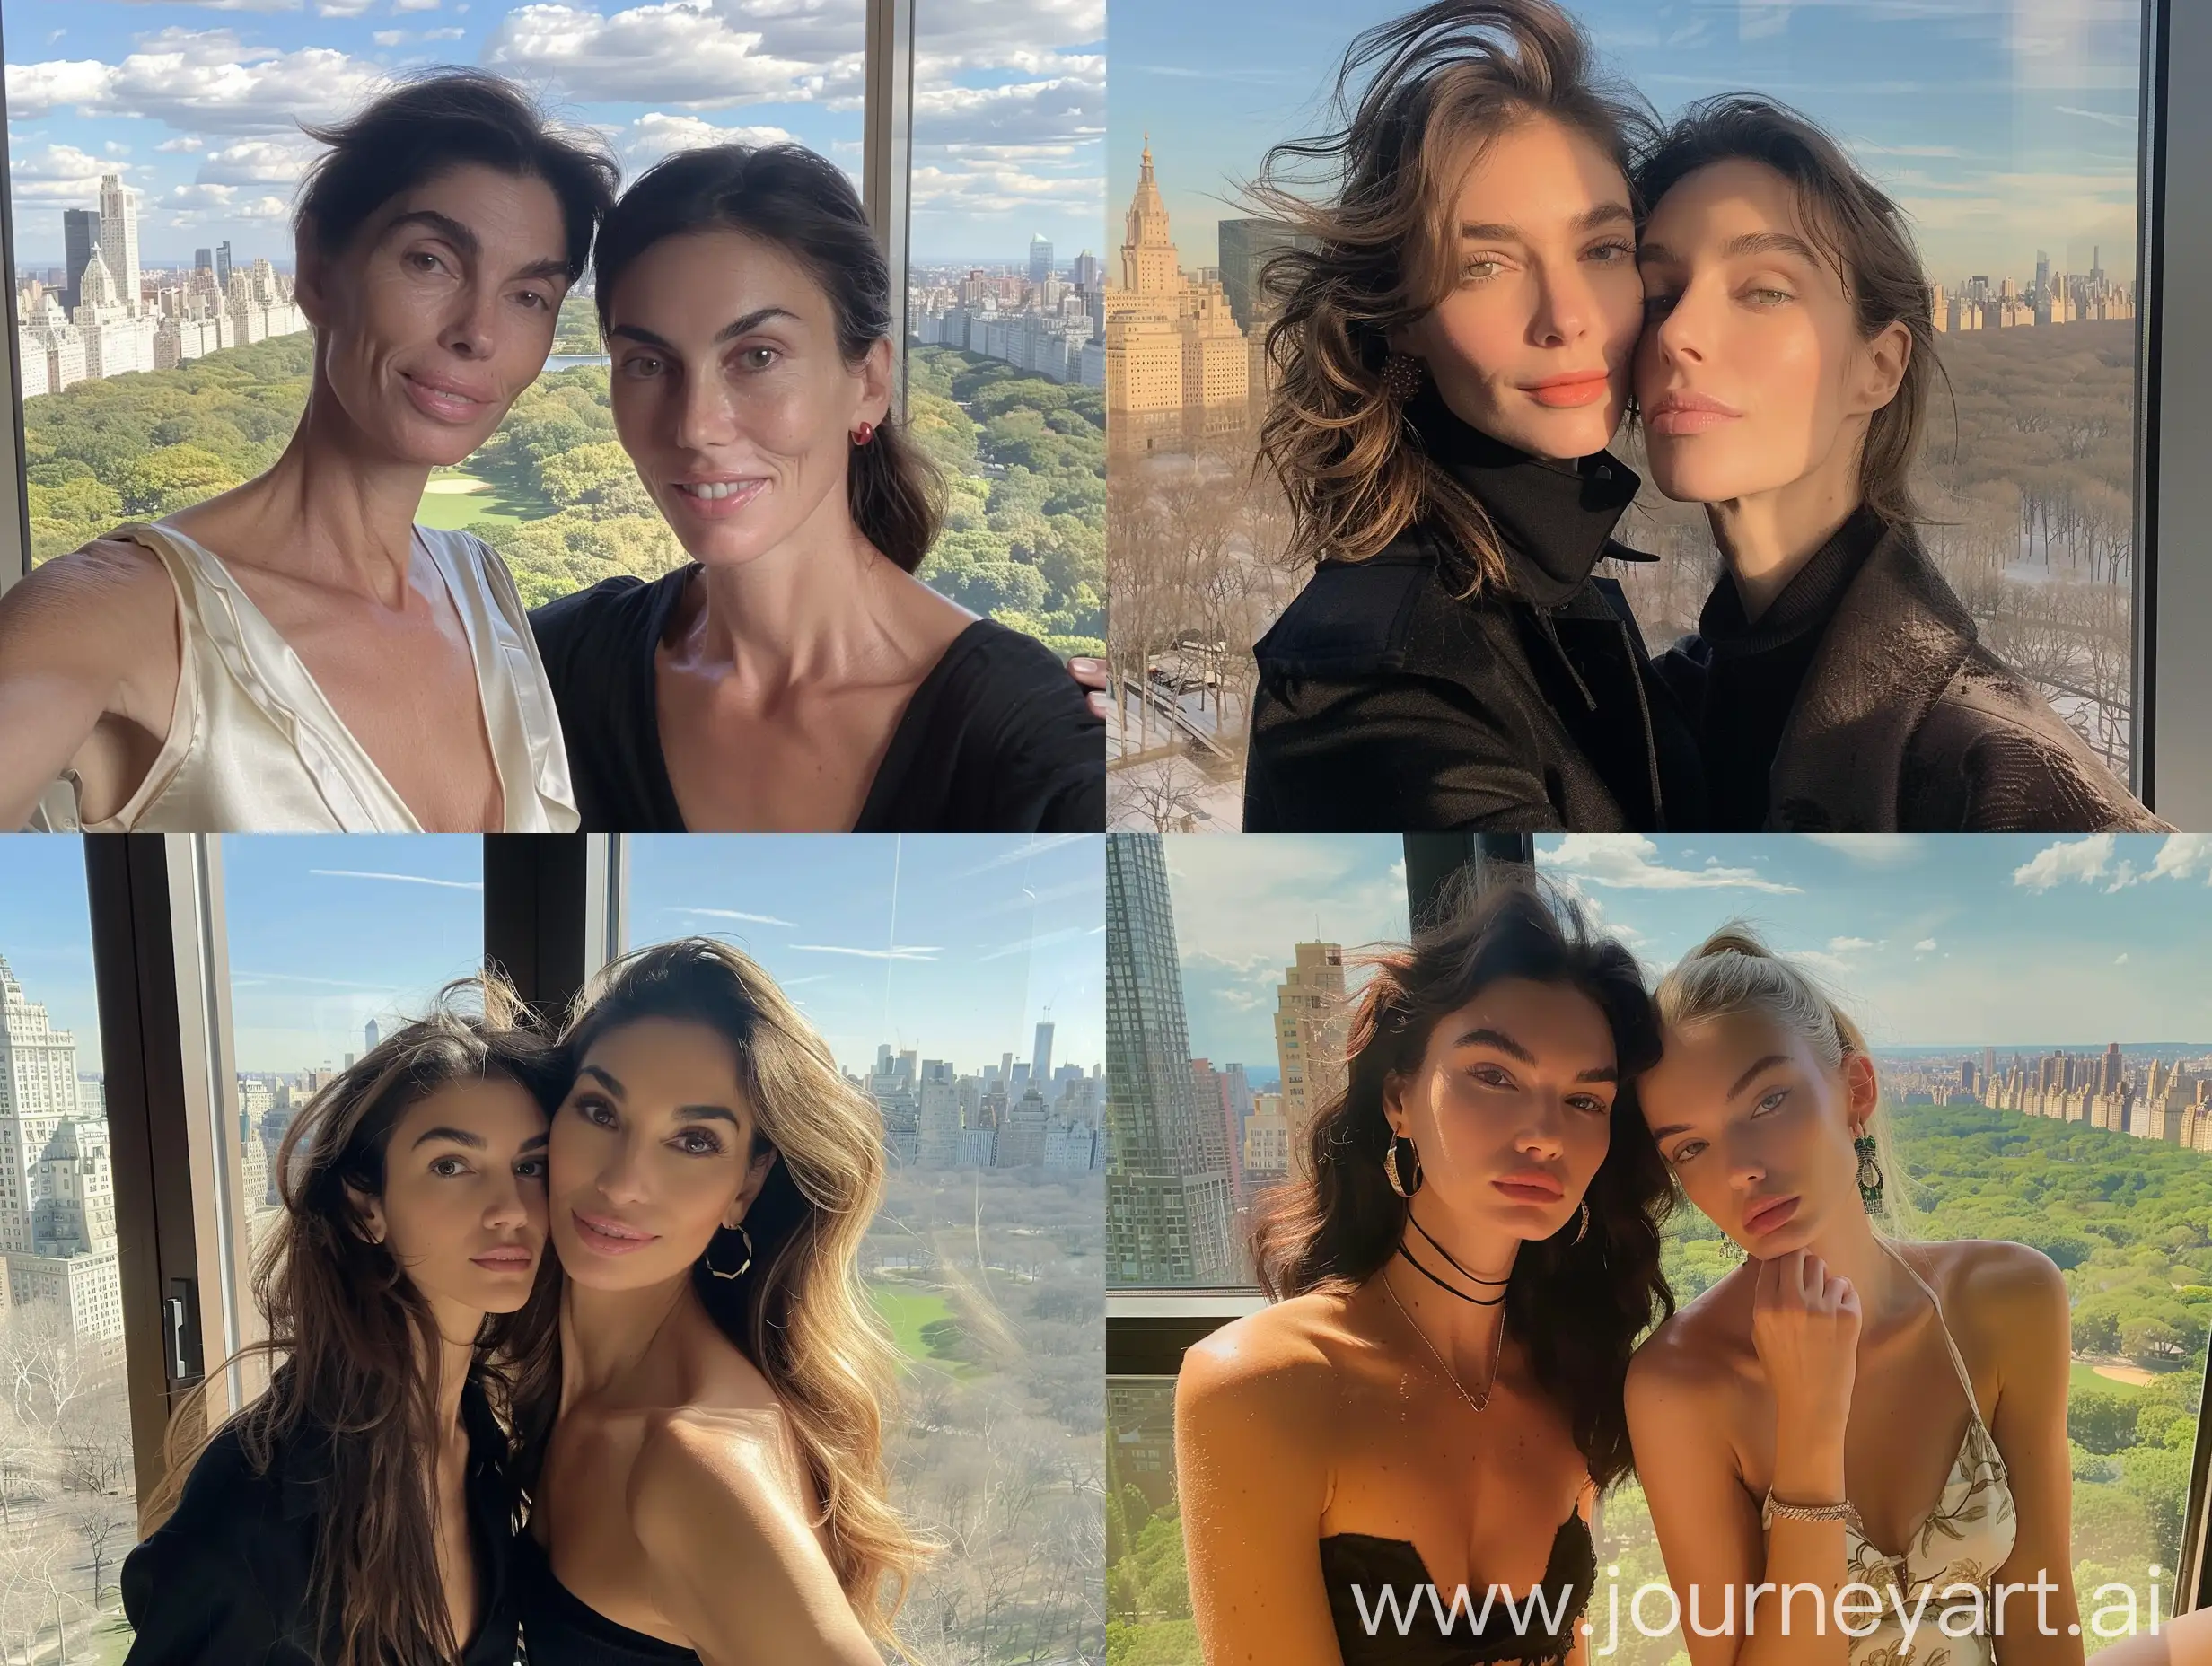 Stylish-MotherDaughter-Instagram-Selfie-in-NYC-Penthouse-with-Central-Park-View